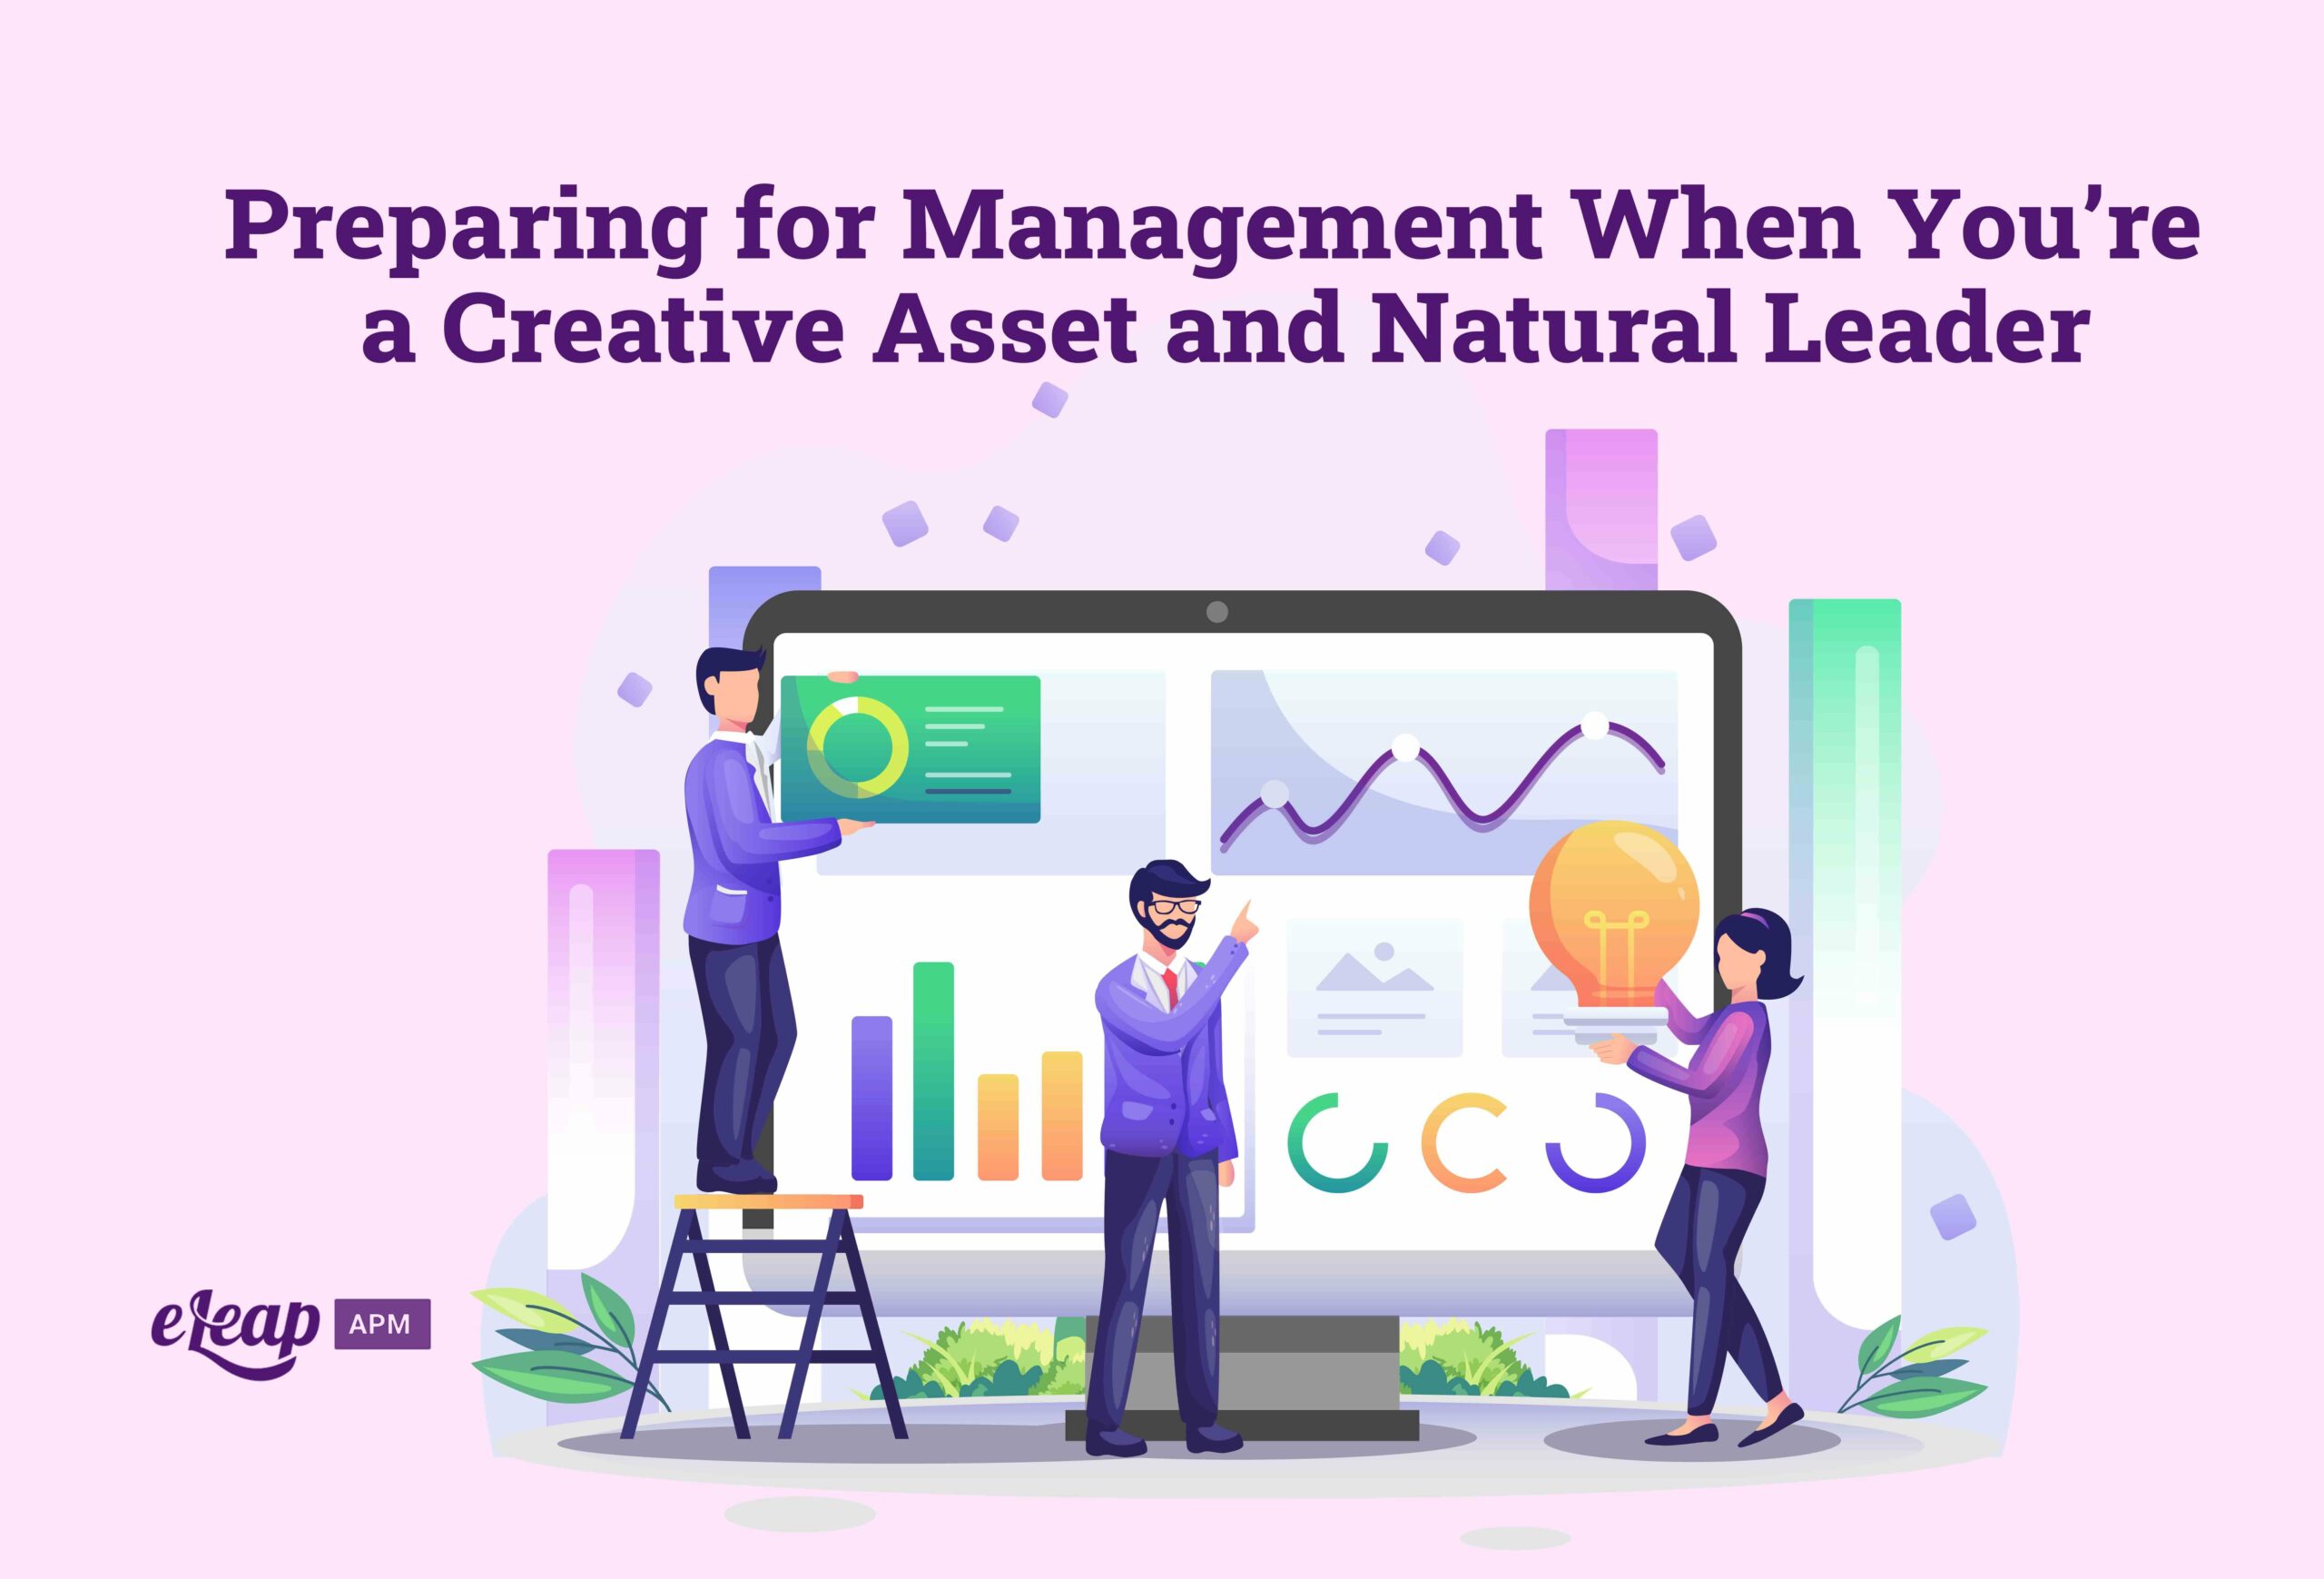 Preparing for Management When You’re a Creative Asset and Natural Leader